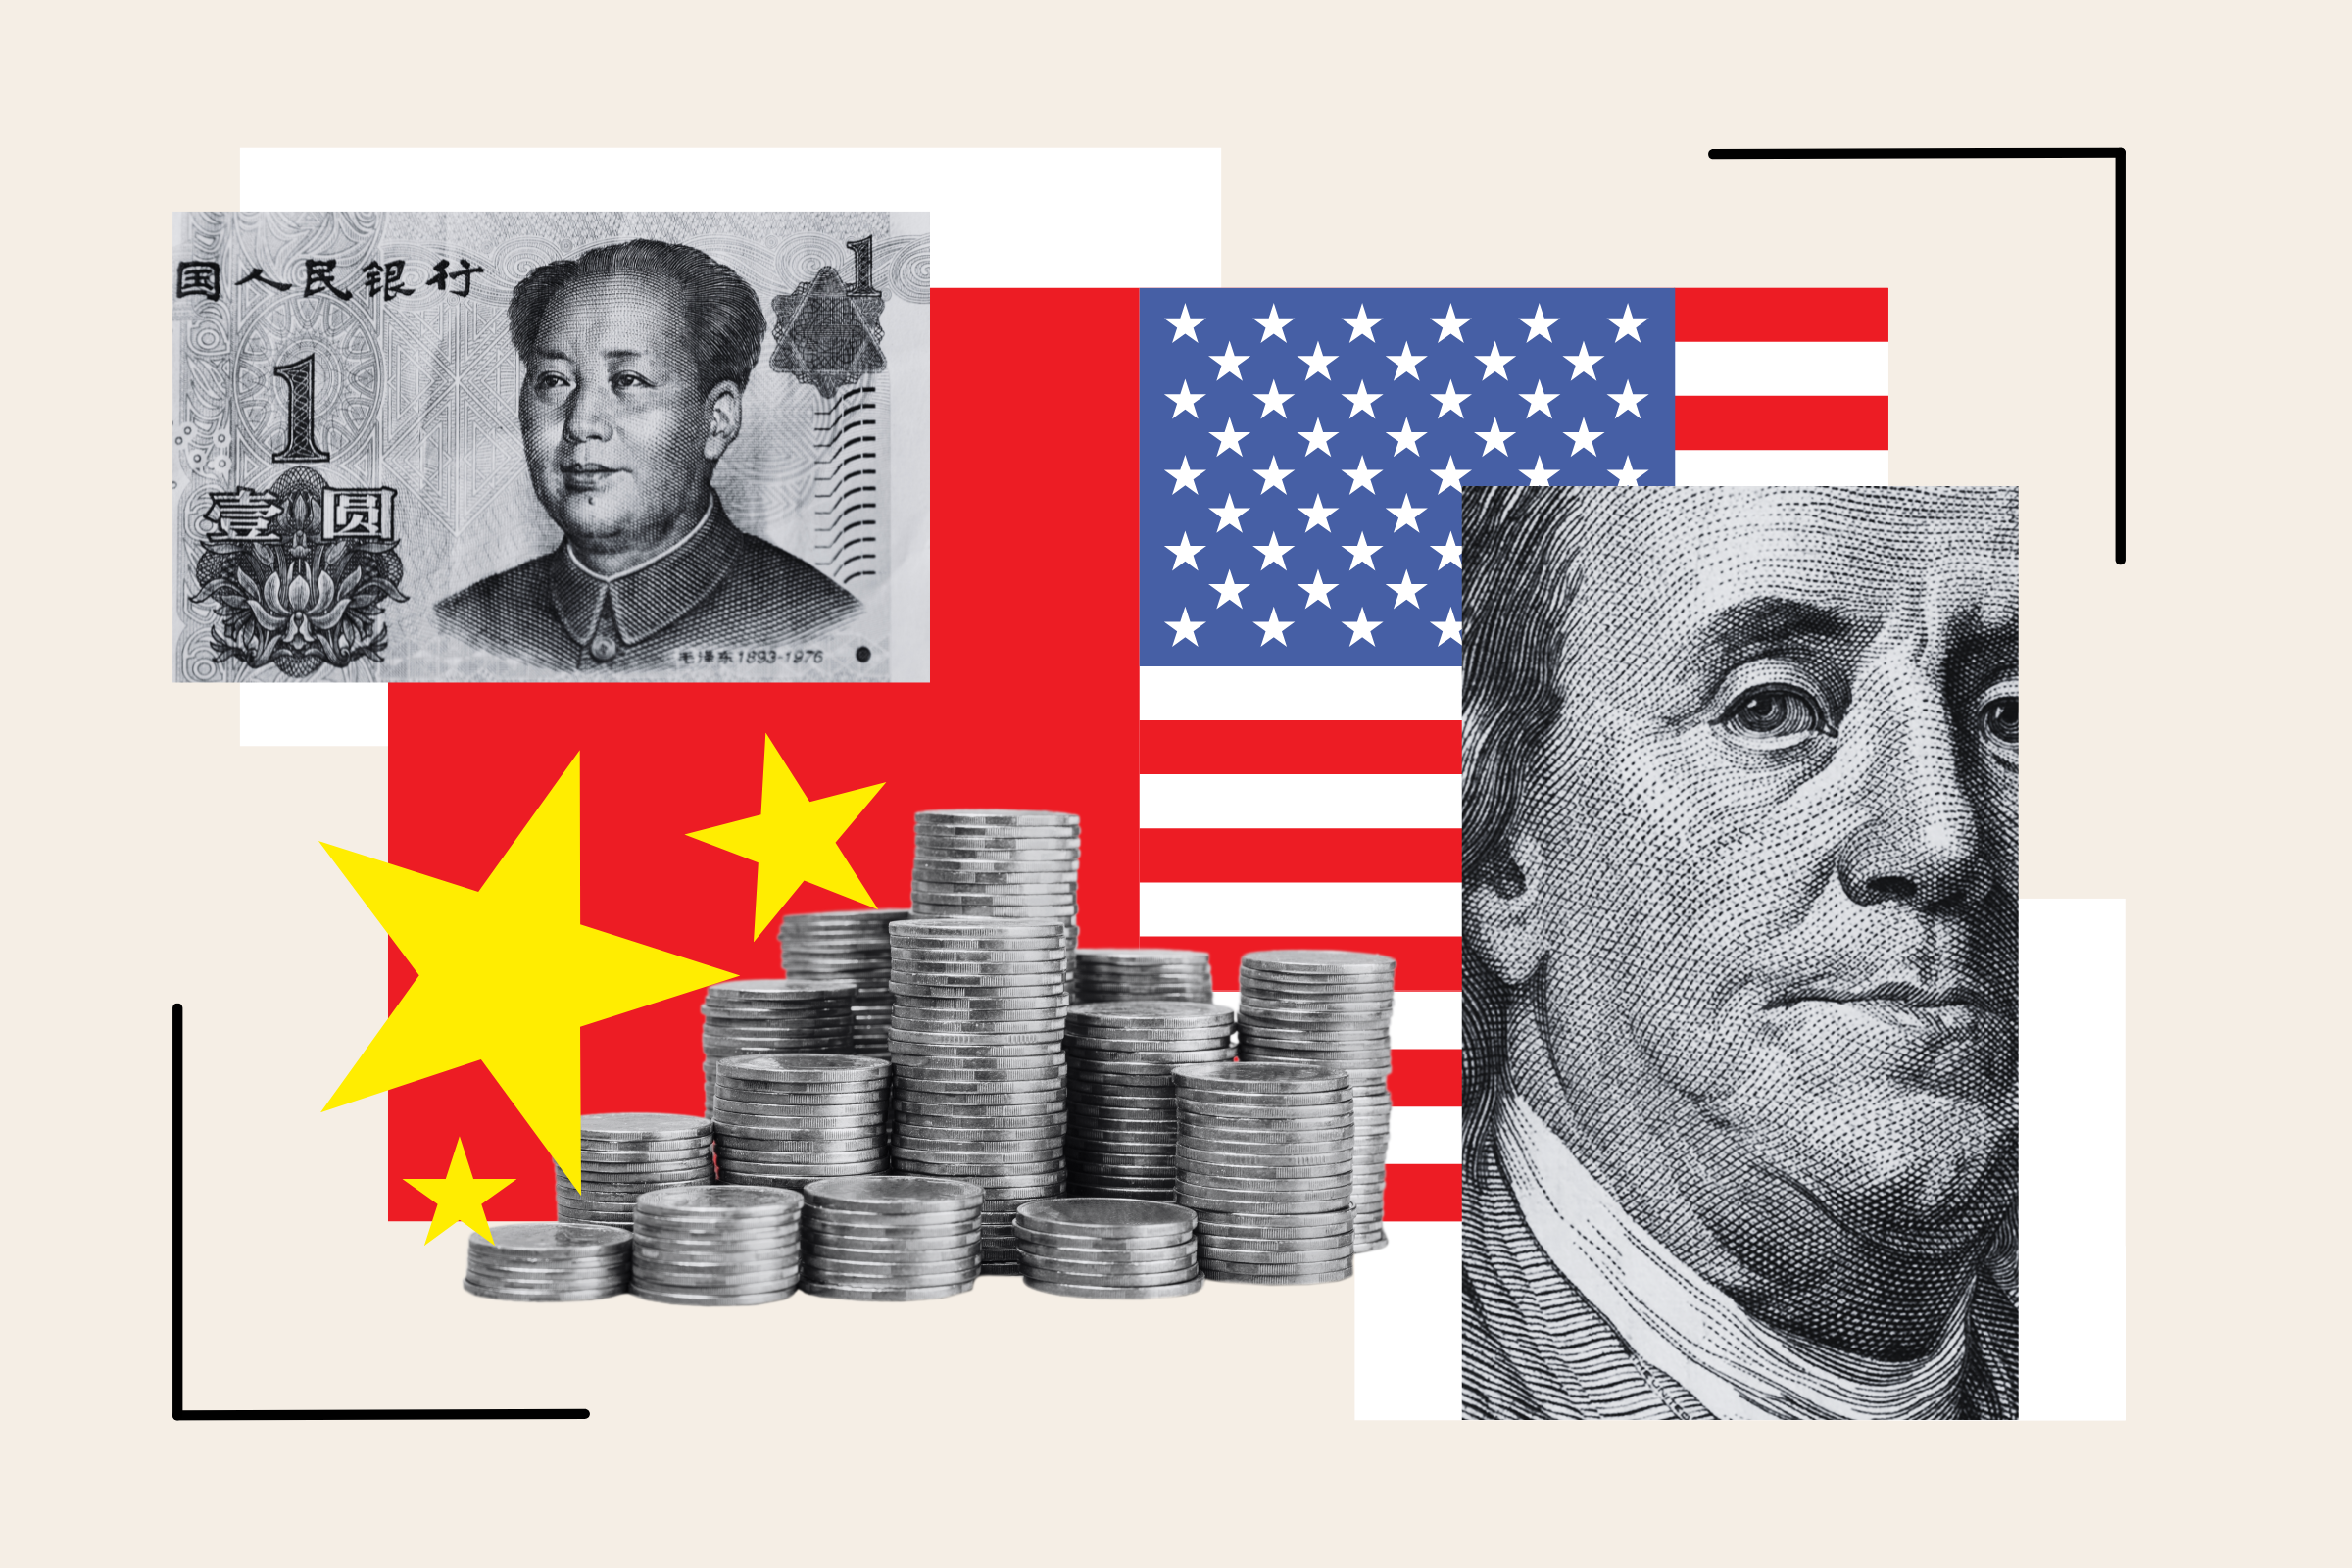 How China's Economy Compares to the US